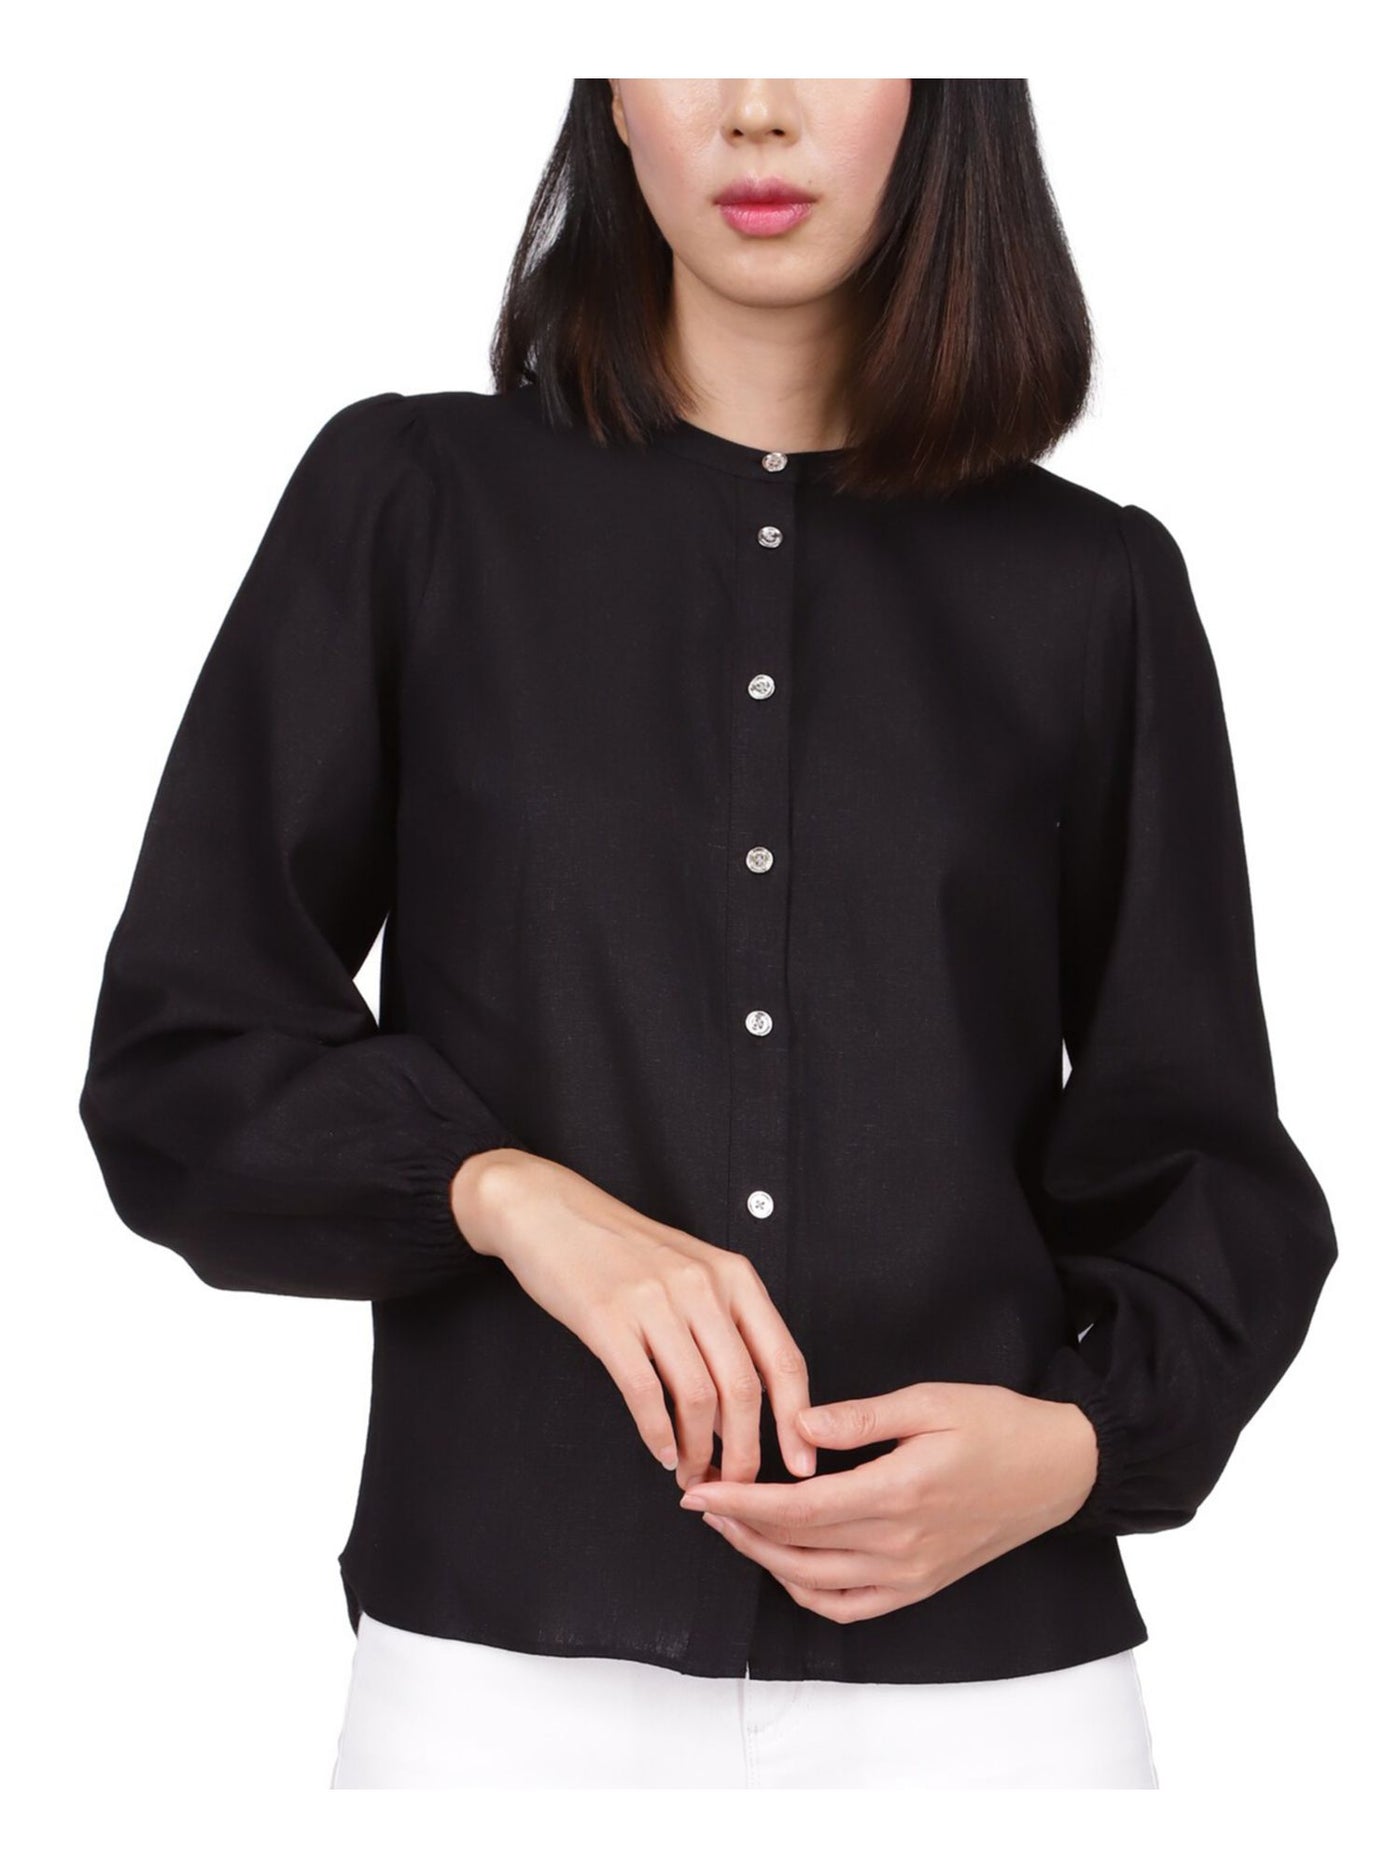 MICHAEL MICHAEL KORS Womens Black Long Sleeve Round Neck Wear To Work Button Up Top M